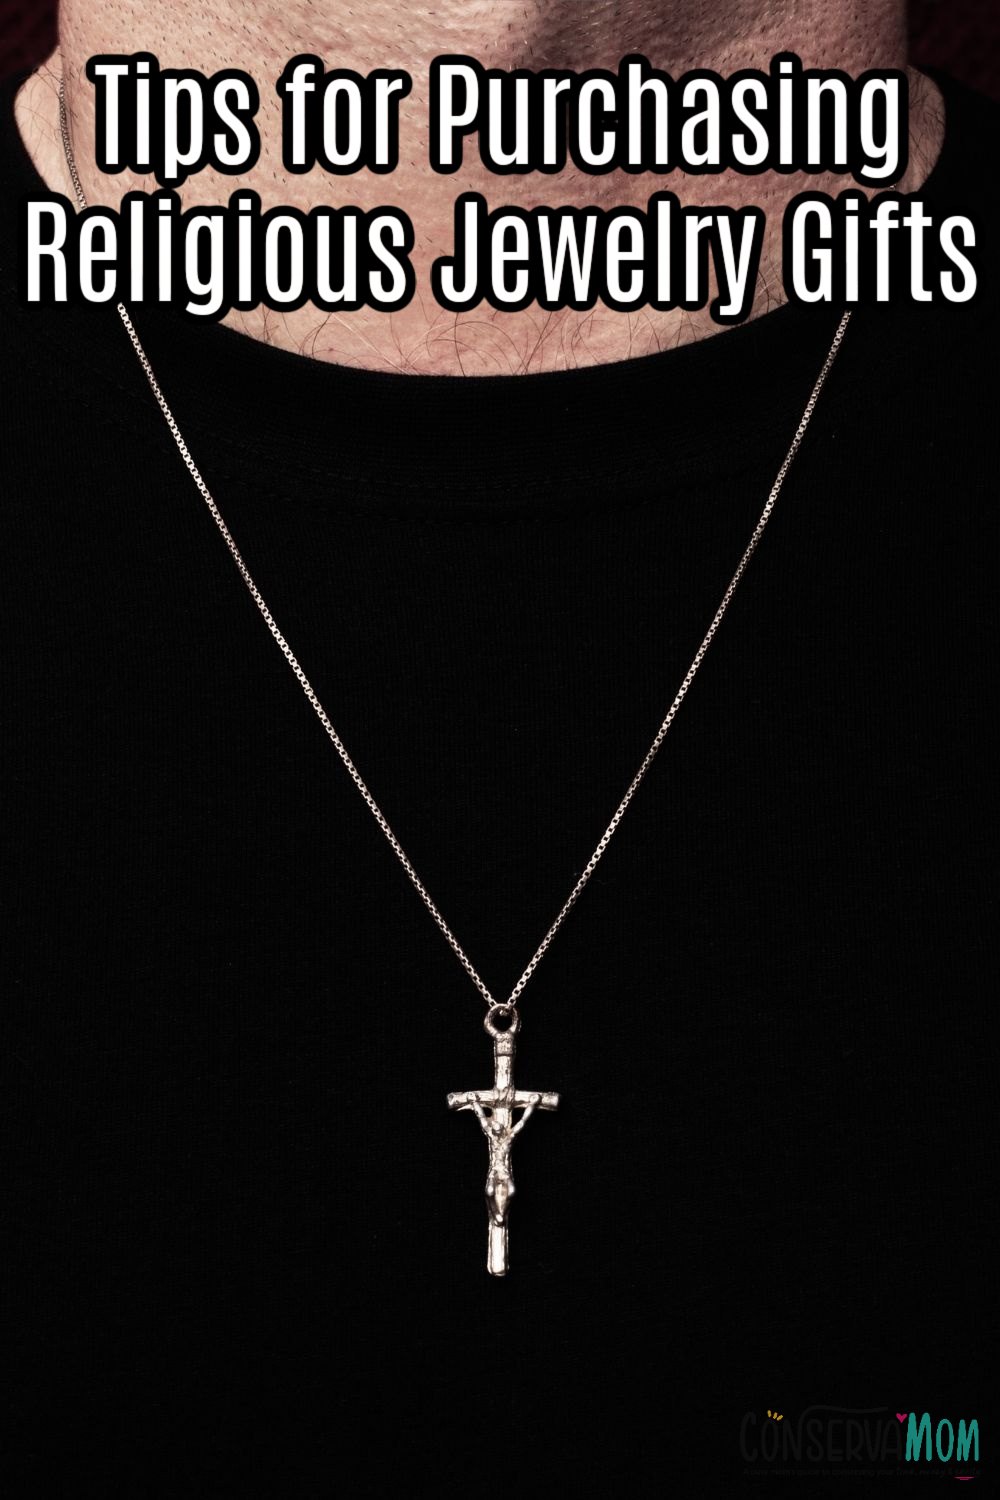 Tips for Purchasing Religious Jewelry Gifts